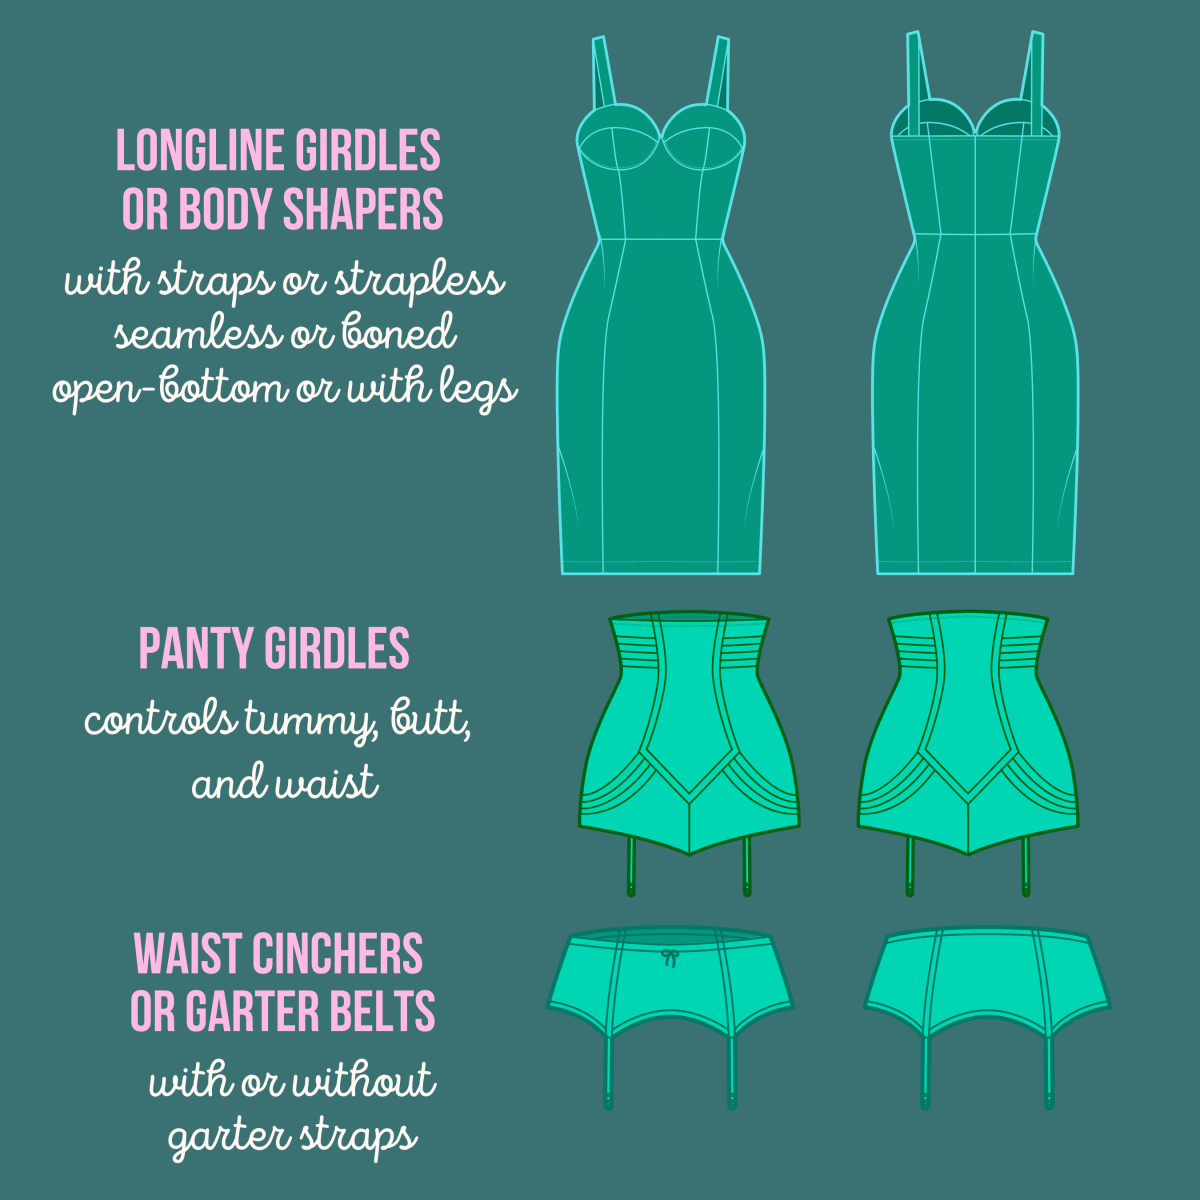 What are the best girdles and most comfortable to wear? - Quora